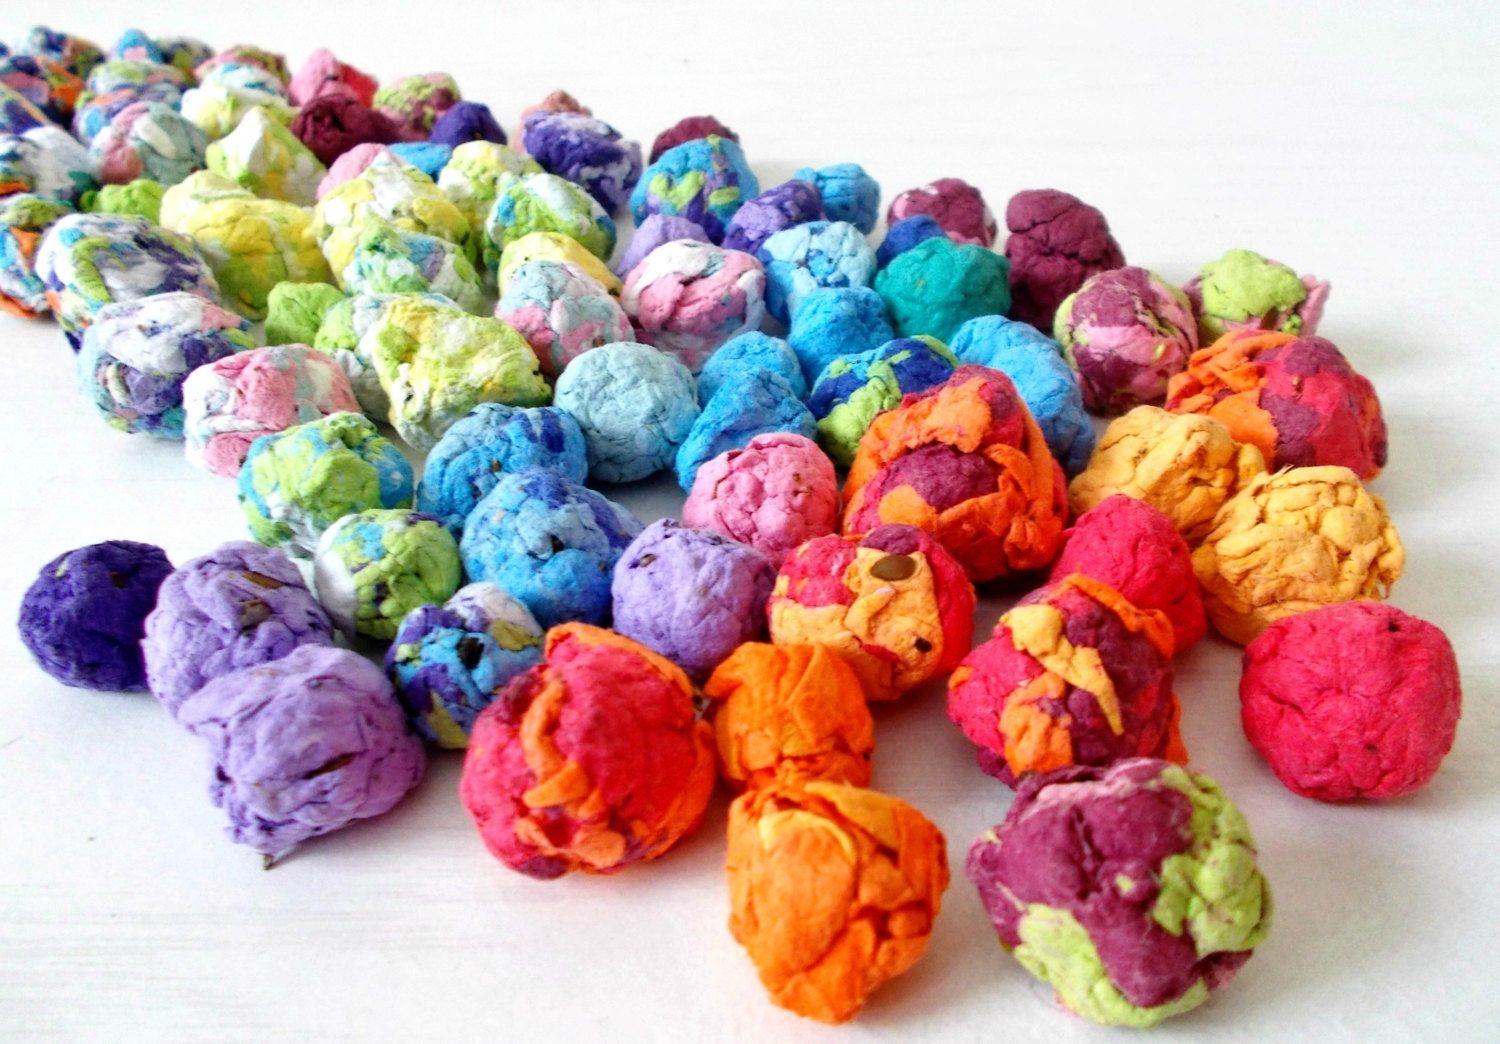 Eco Friendly Seed Bombs -Plantable Paper With Wildflower Seed Balls - Rainbow Mix of Colors